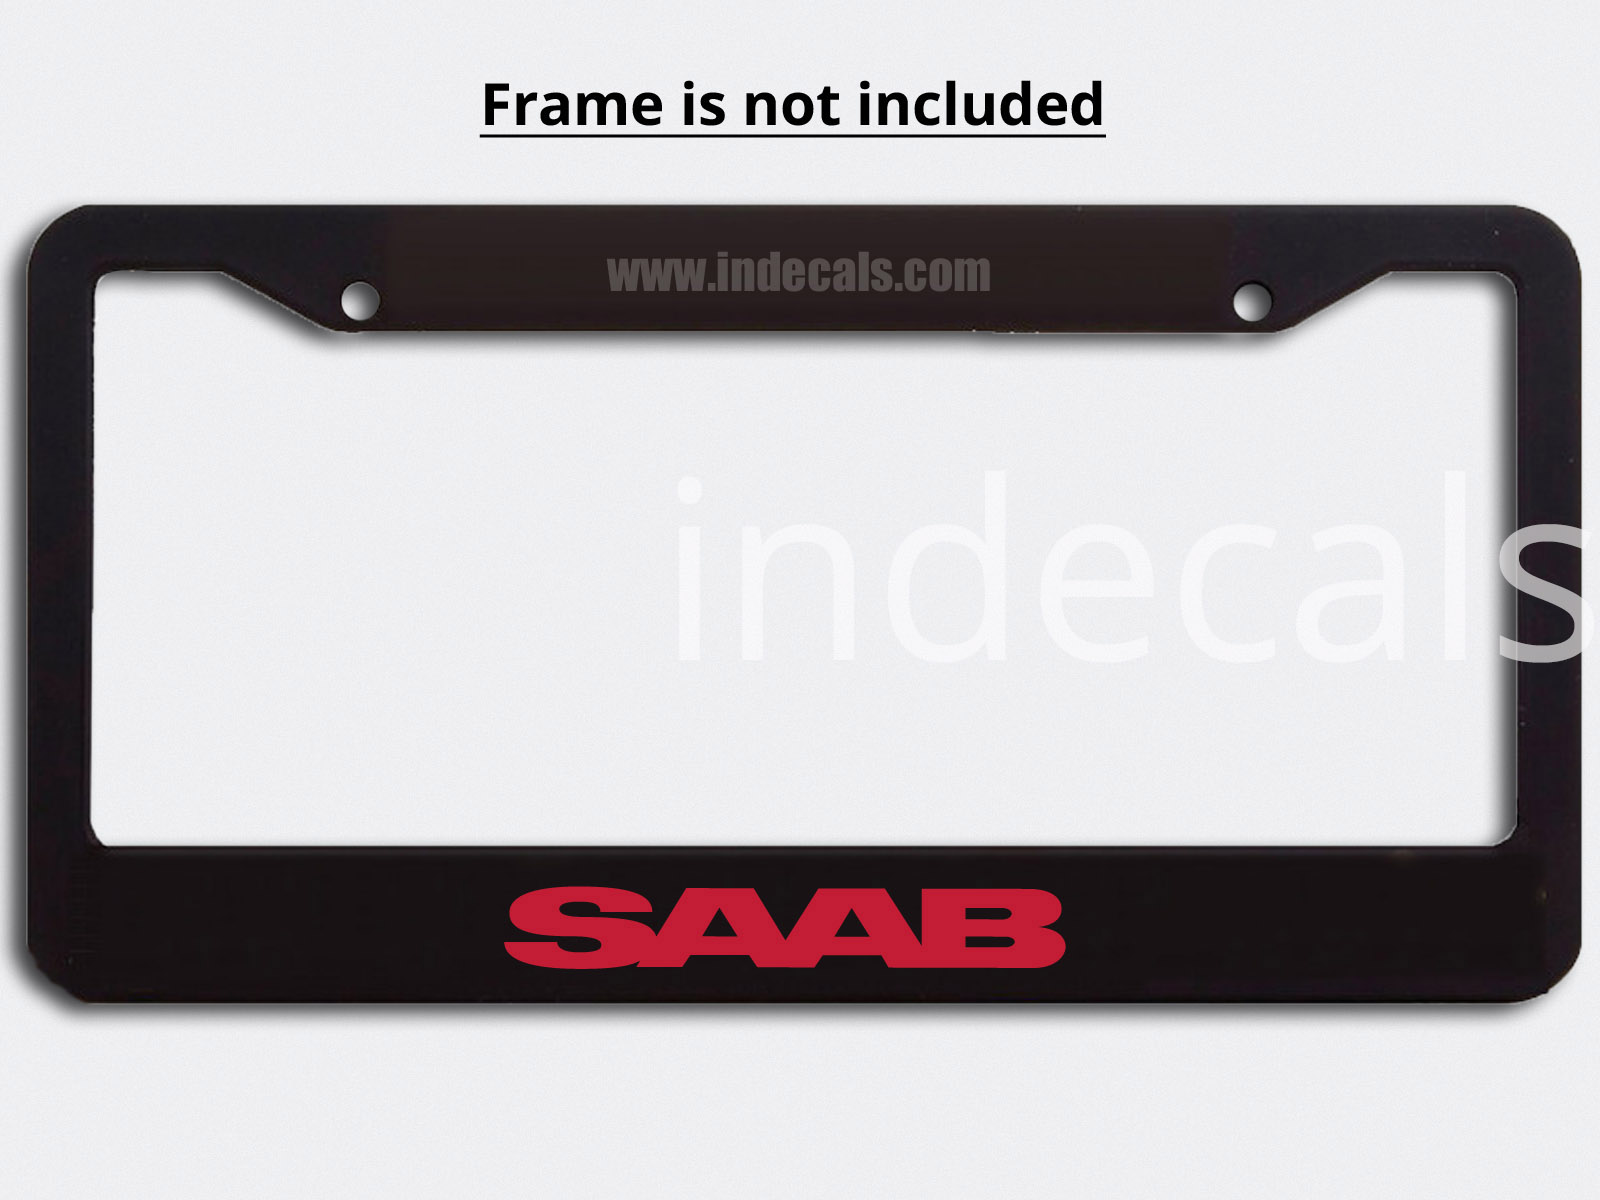 3 x Saab Stickers for Plate Frame - Red